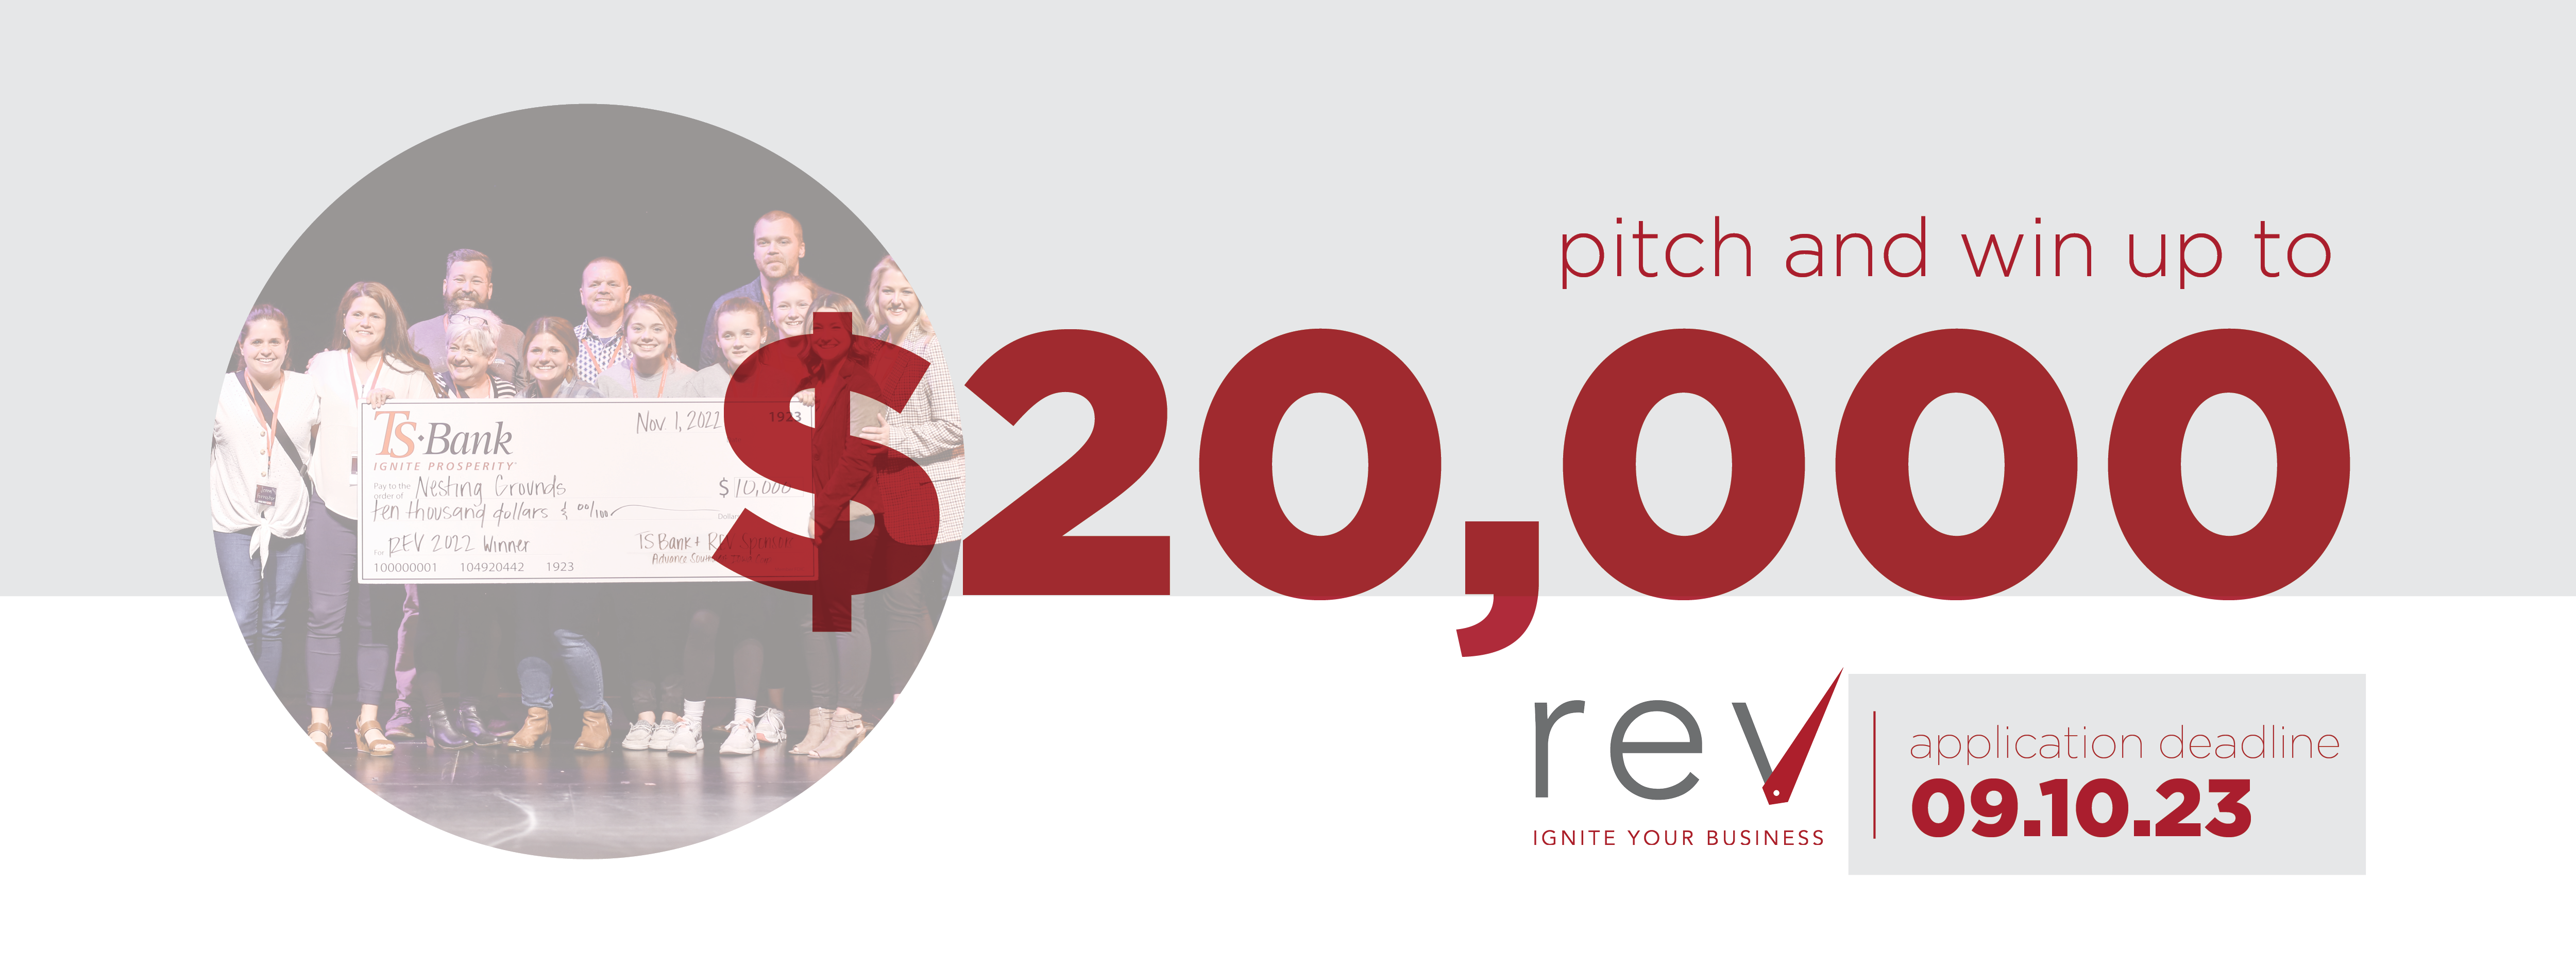 Pitch and win up to $20,000